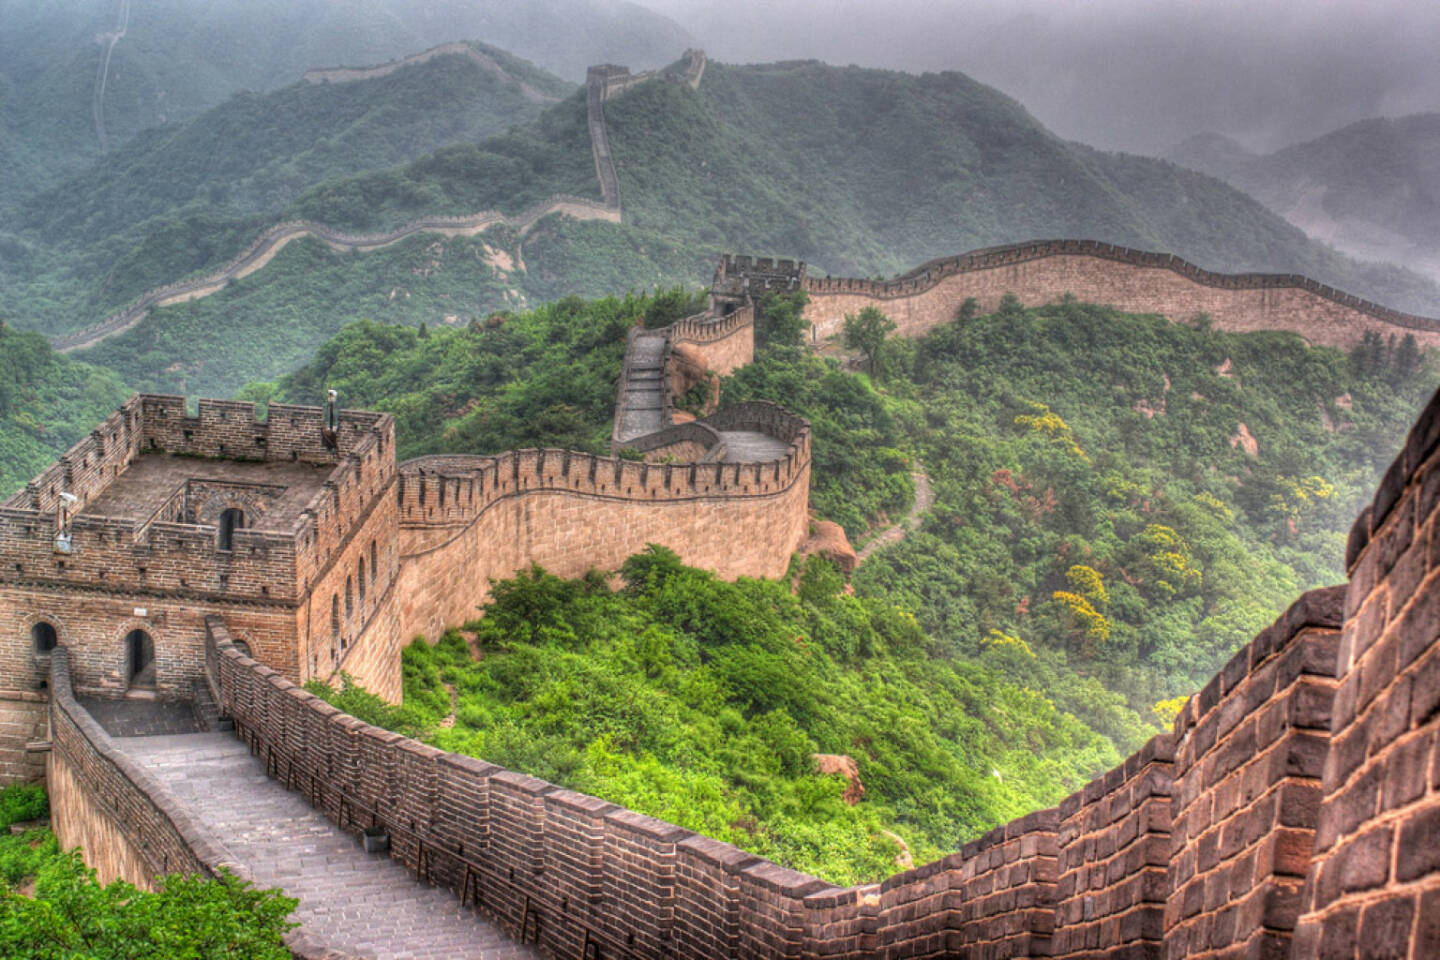 Chinesische Mauer, China, http://www.shutterstock.com/de/pic-93984988/stock-photo-the-great-wall-of-china.html 